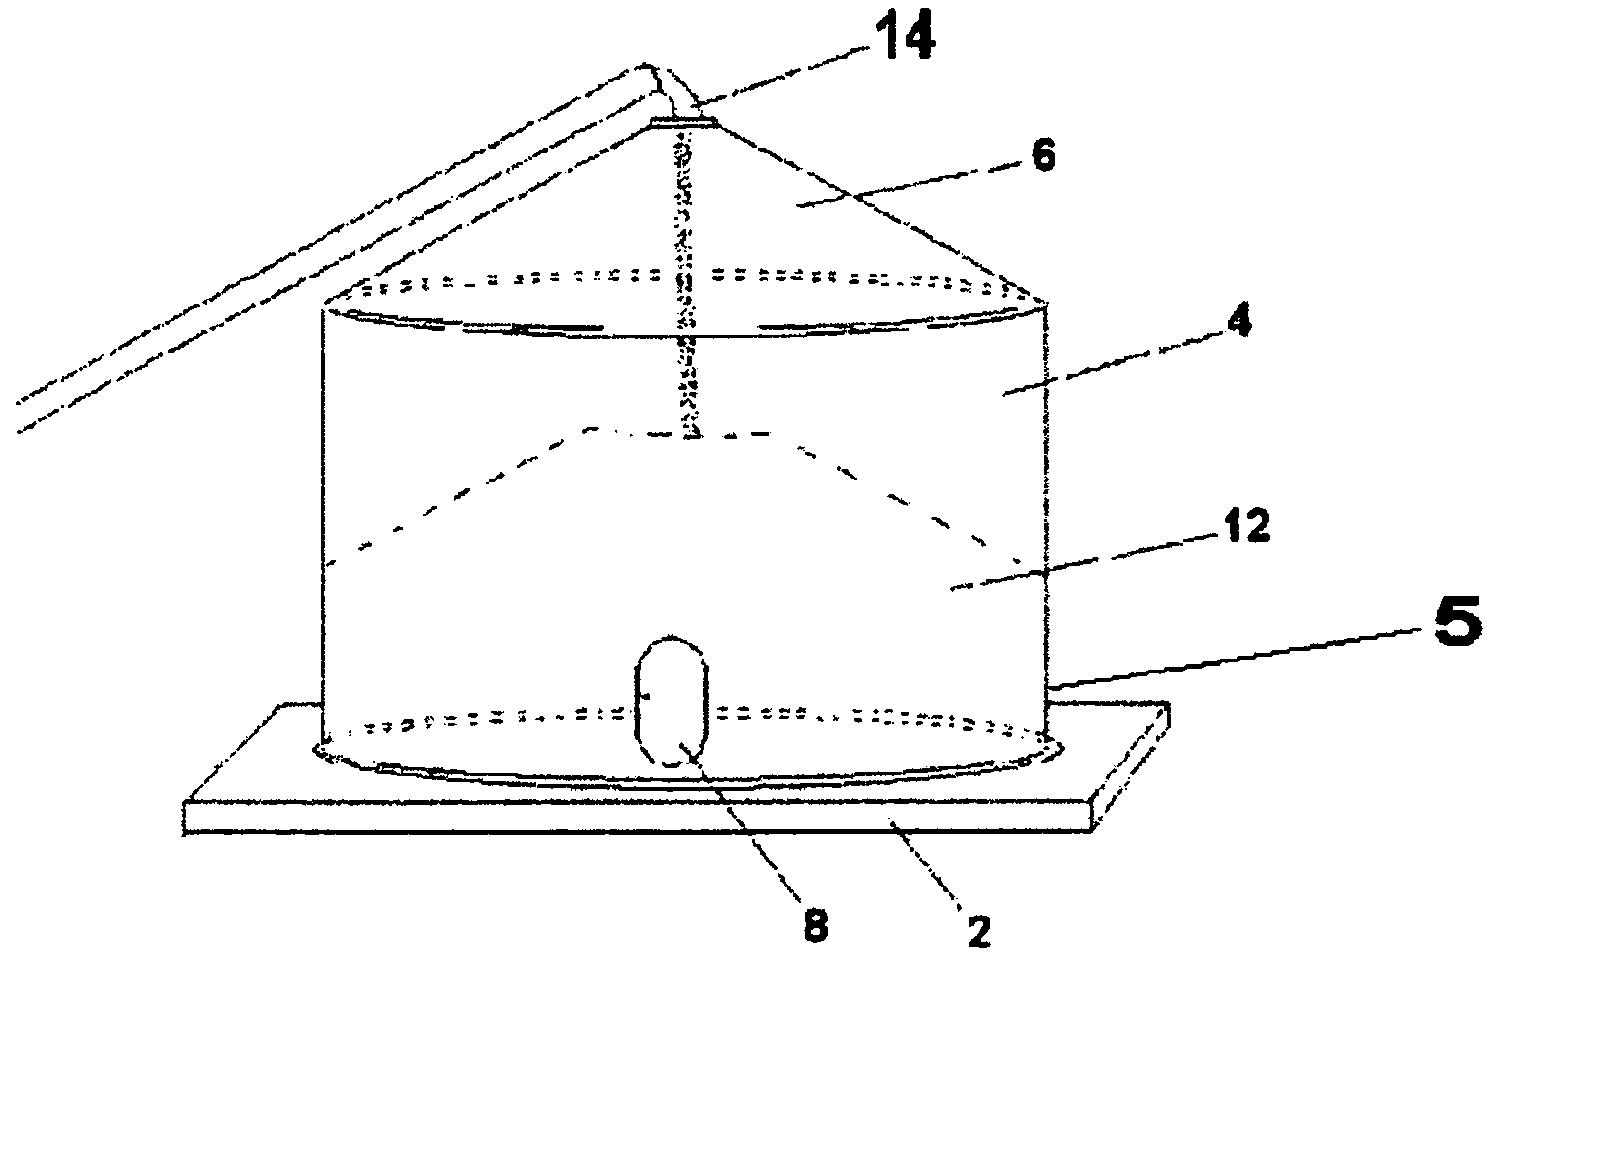 Device and method for the transferring of grain from a grain bin